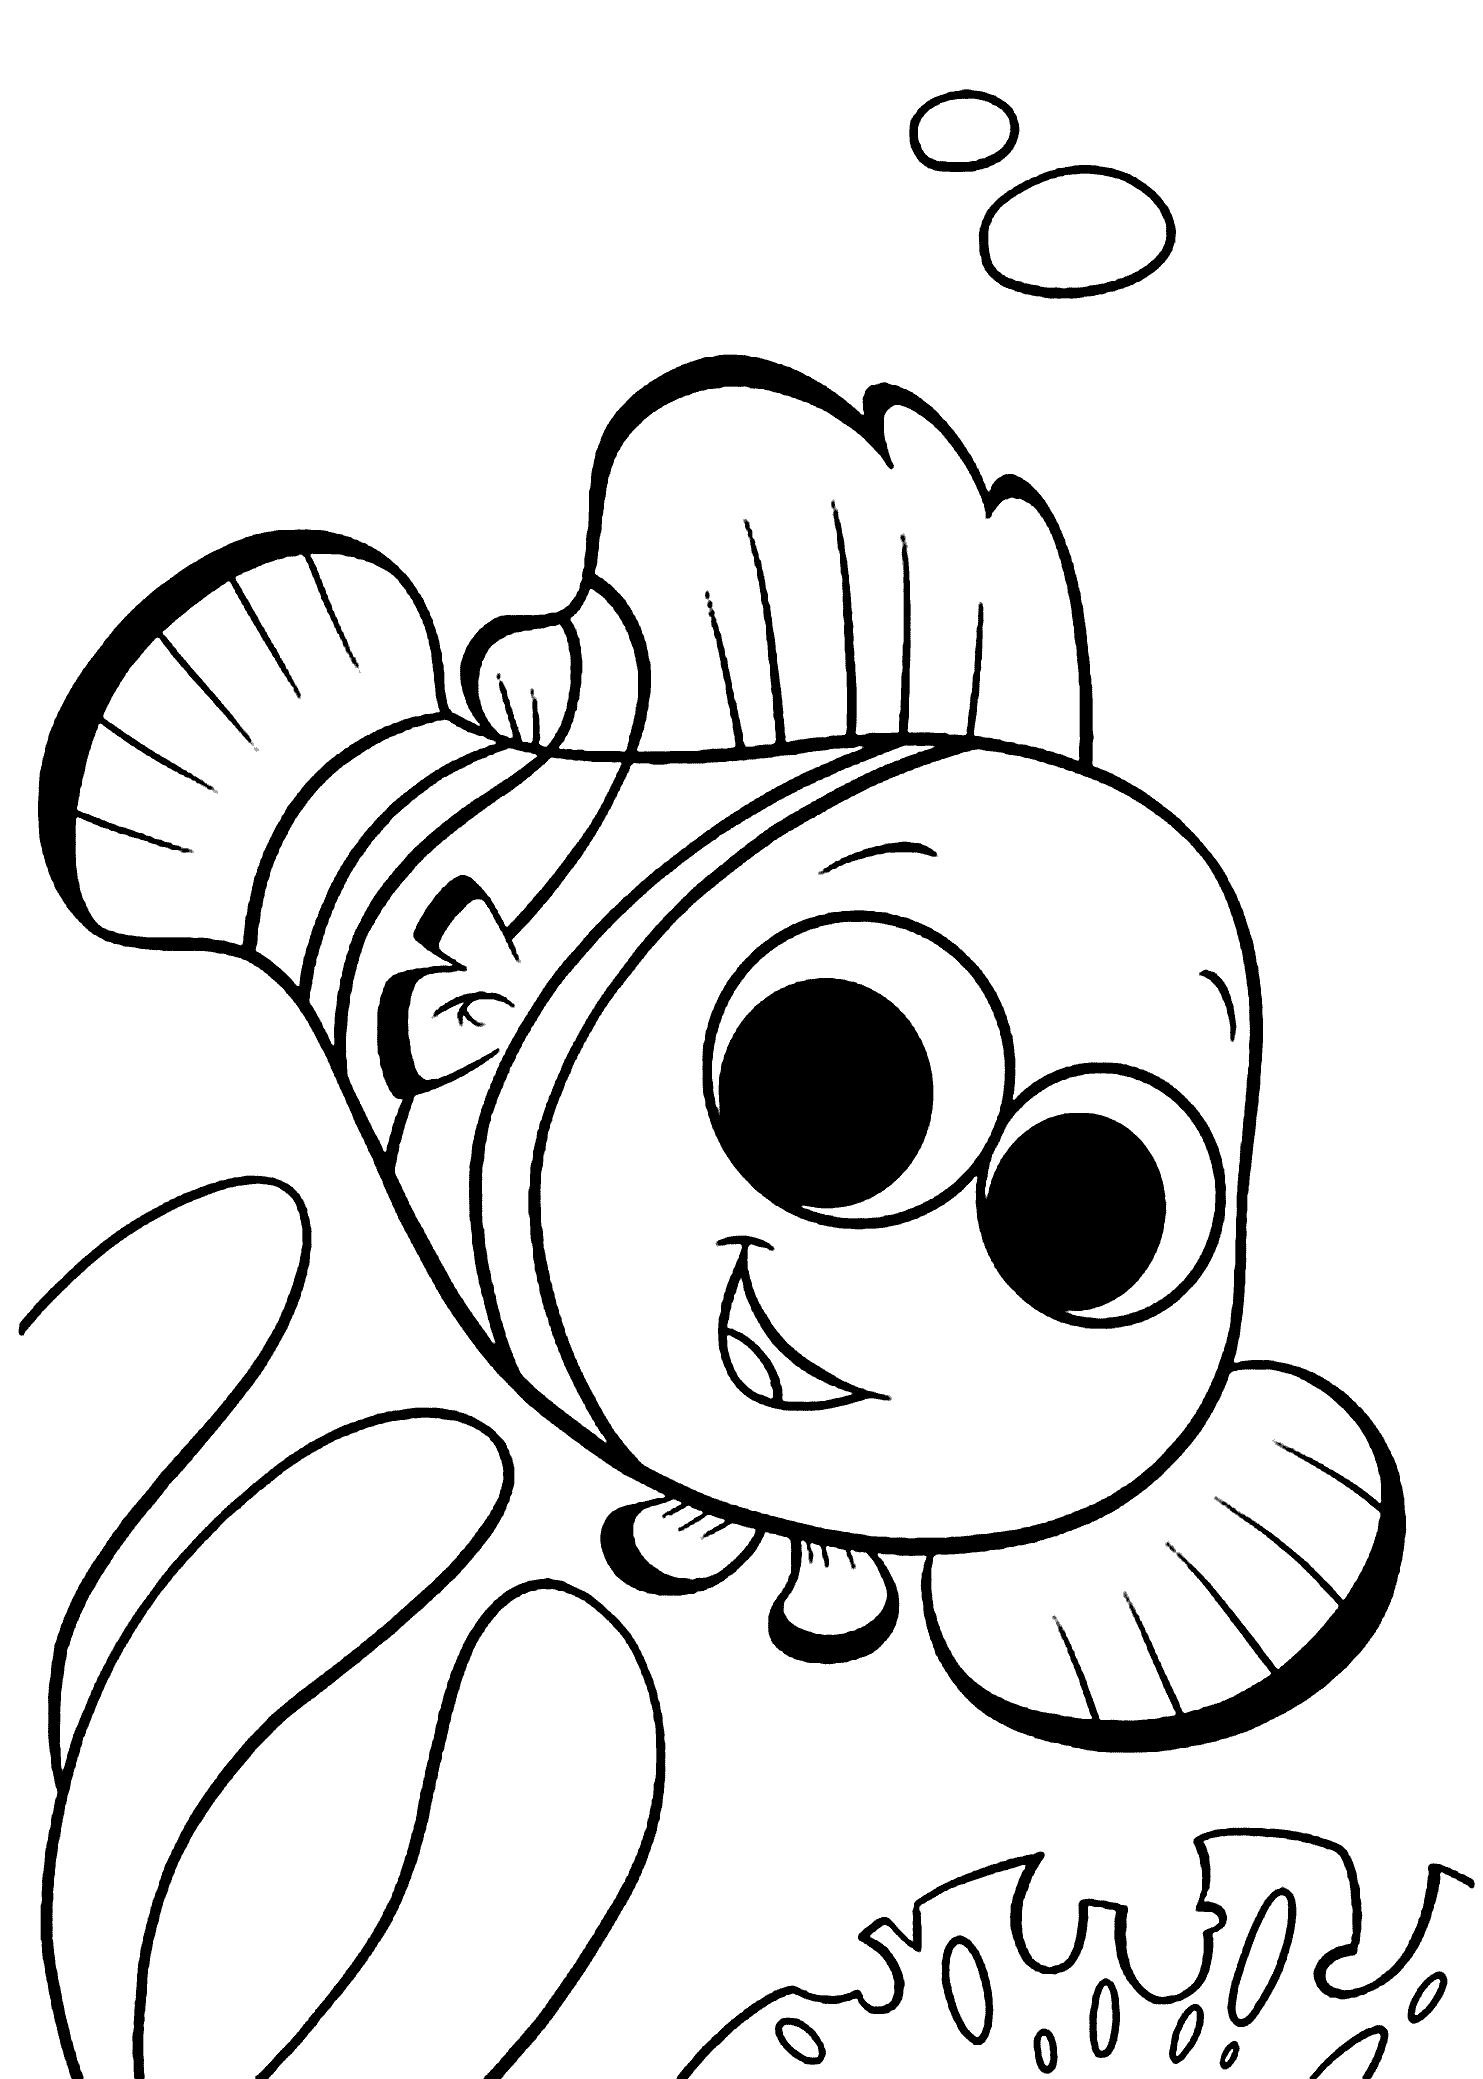 finding nemo free coloring pages disney finding nemo fish coloring pages to drawing pictures free pages nemo coloring finding 